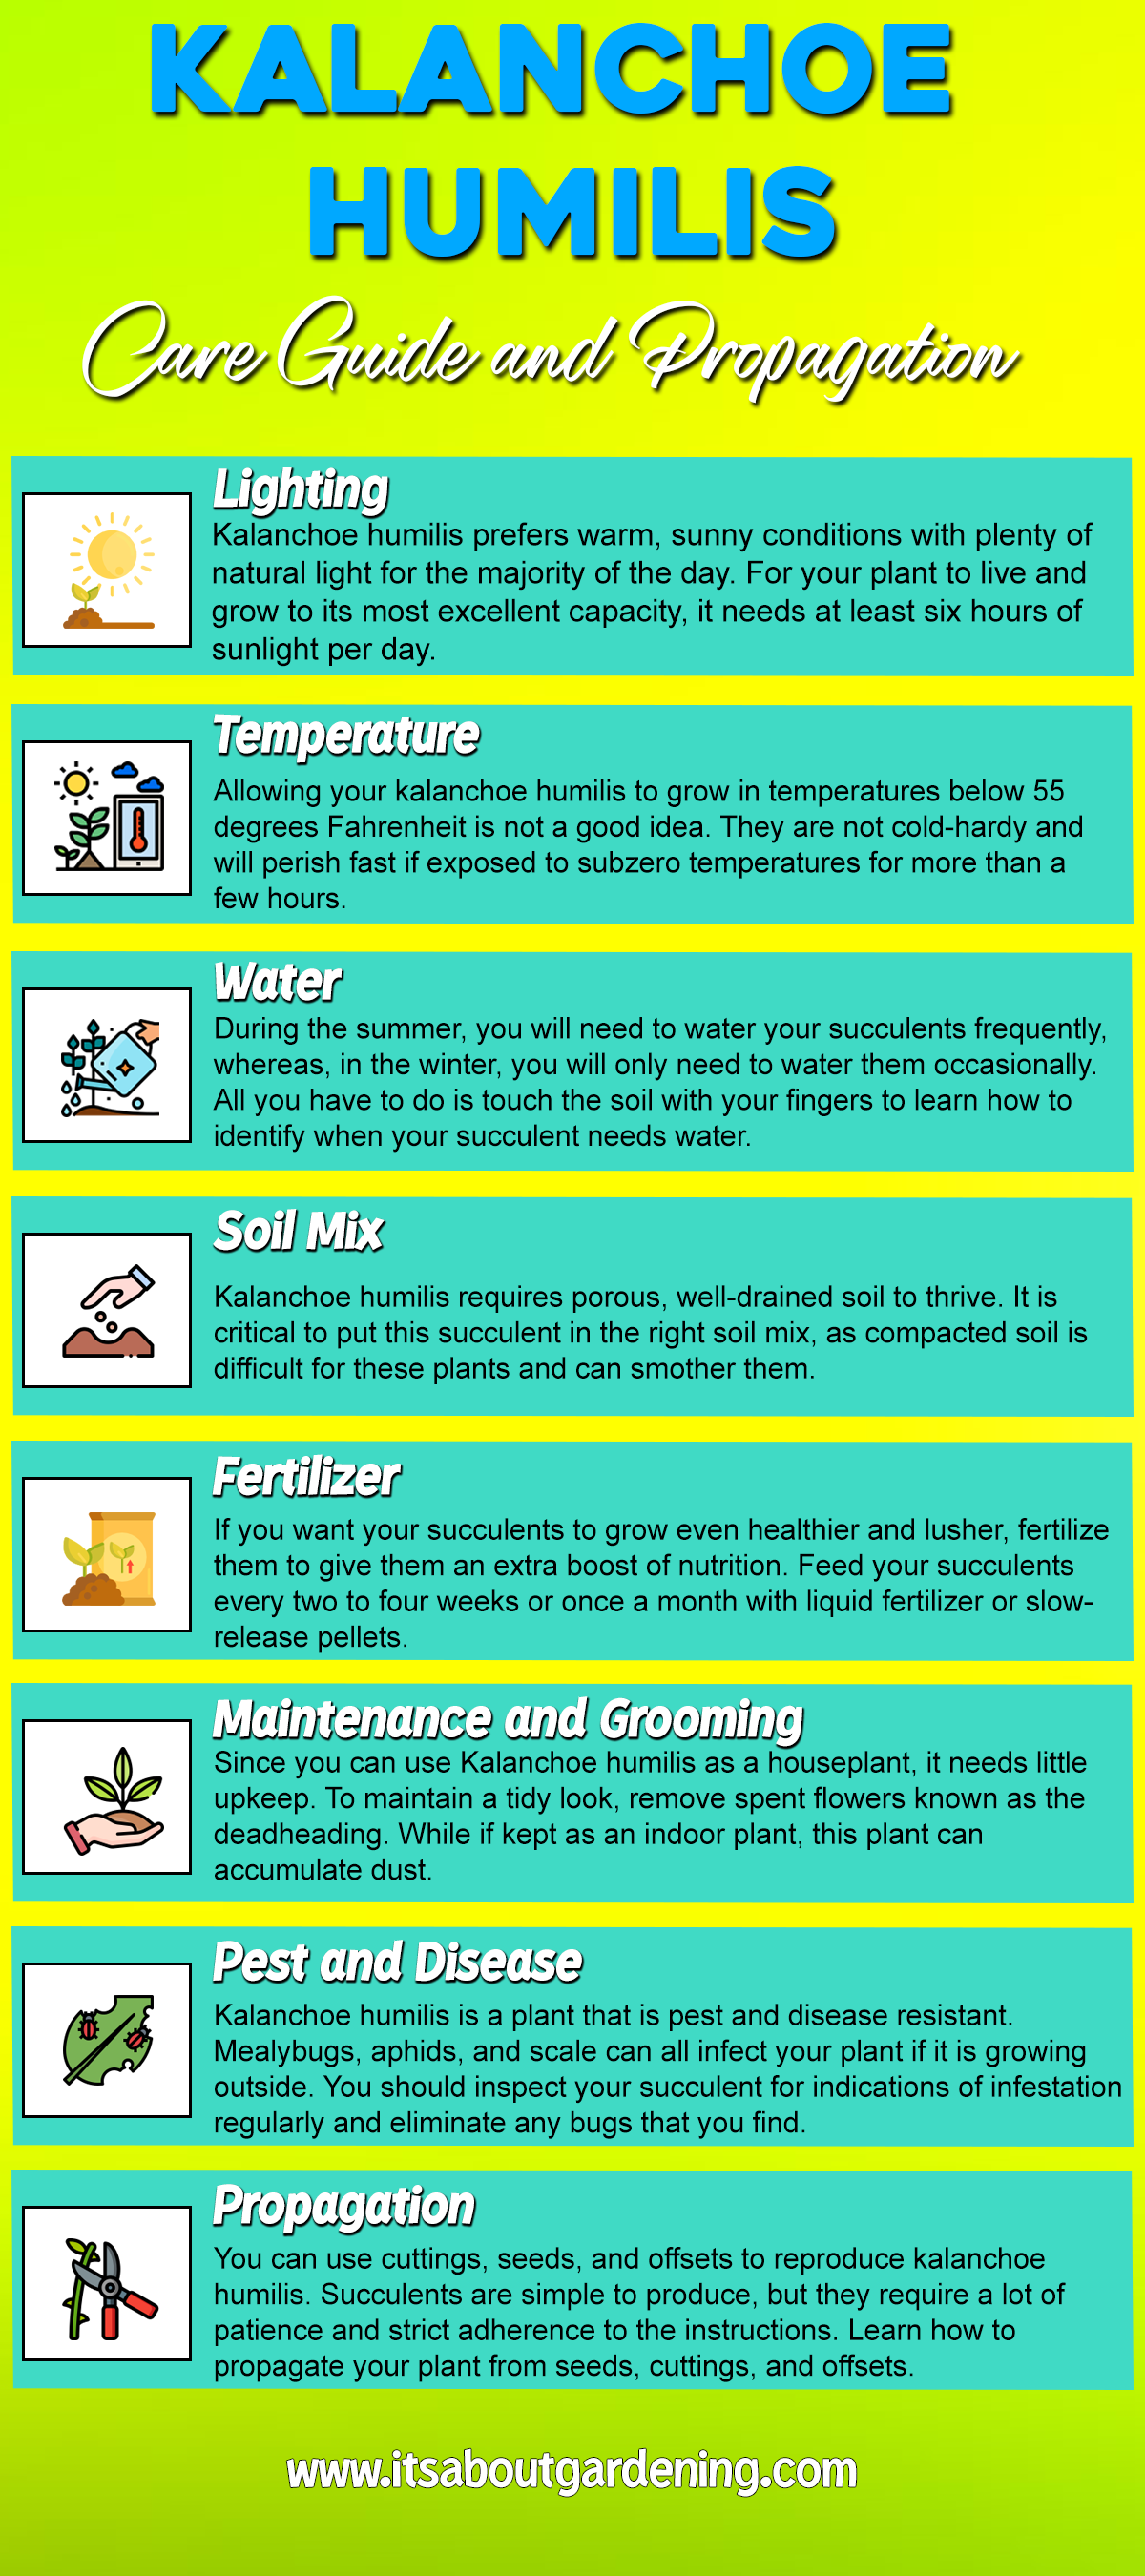 Kalanchoe Humilis Care Guide and Propagation Infographic